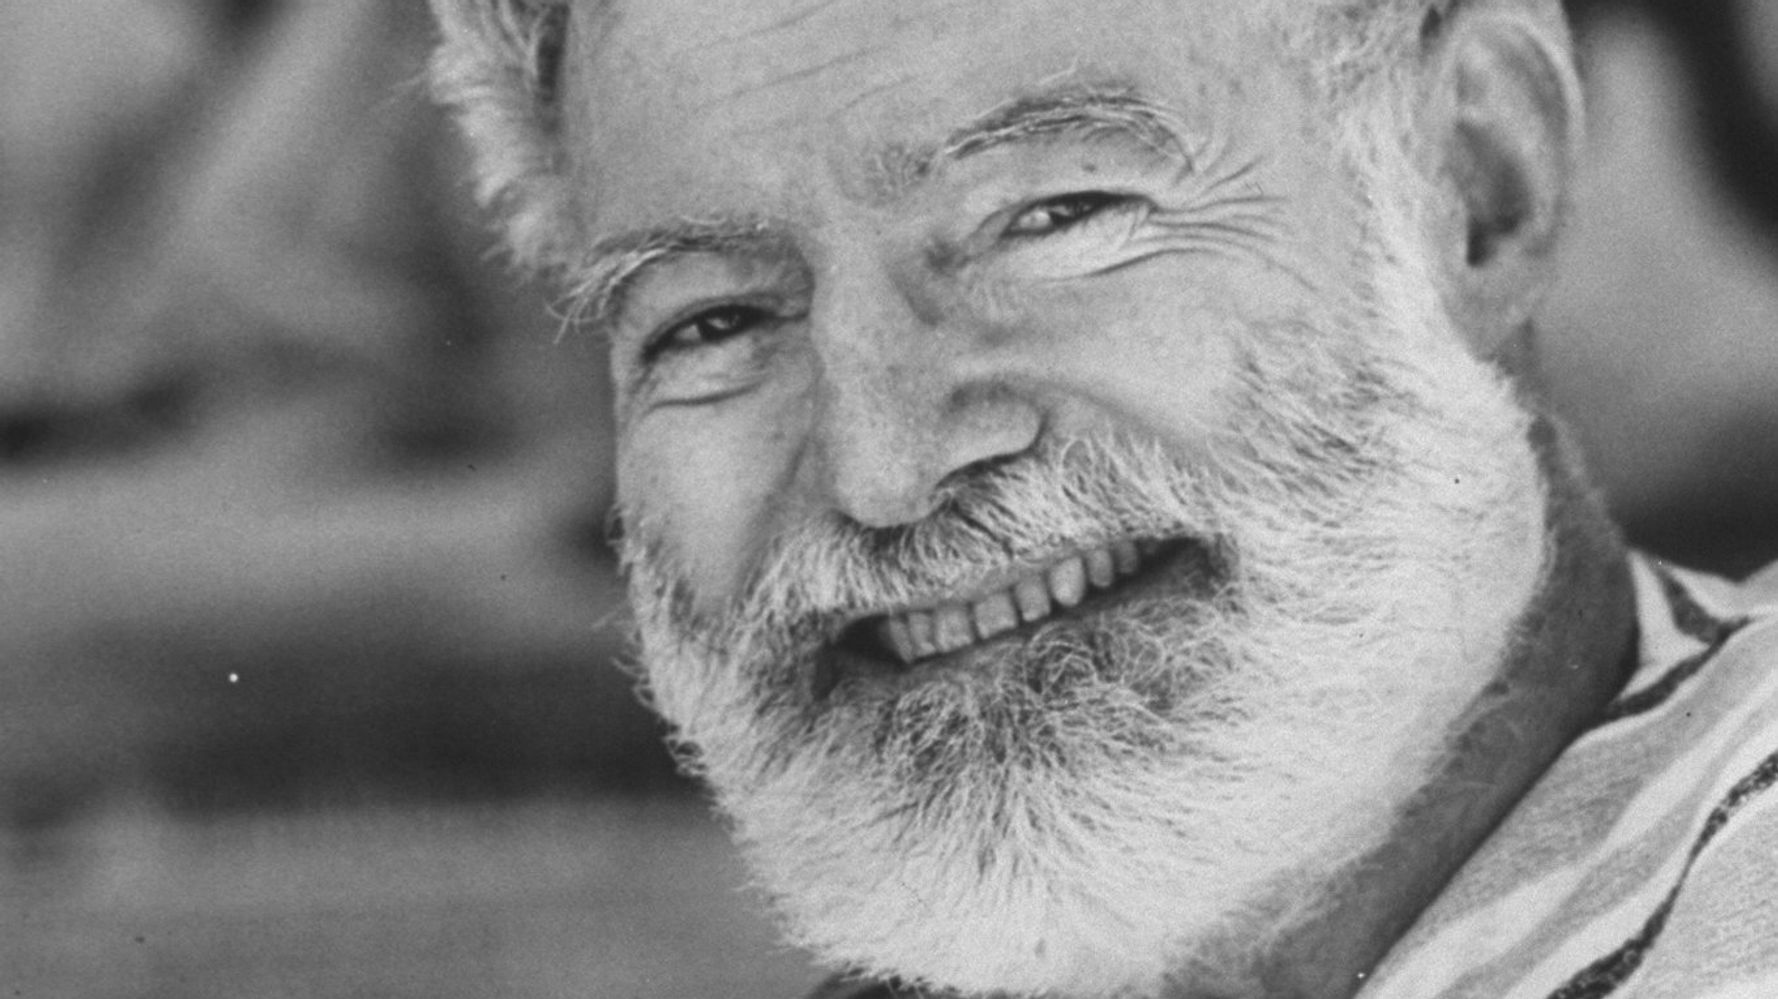 Ernest Hemingway Story From 1956 To Be Published For The First Time.